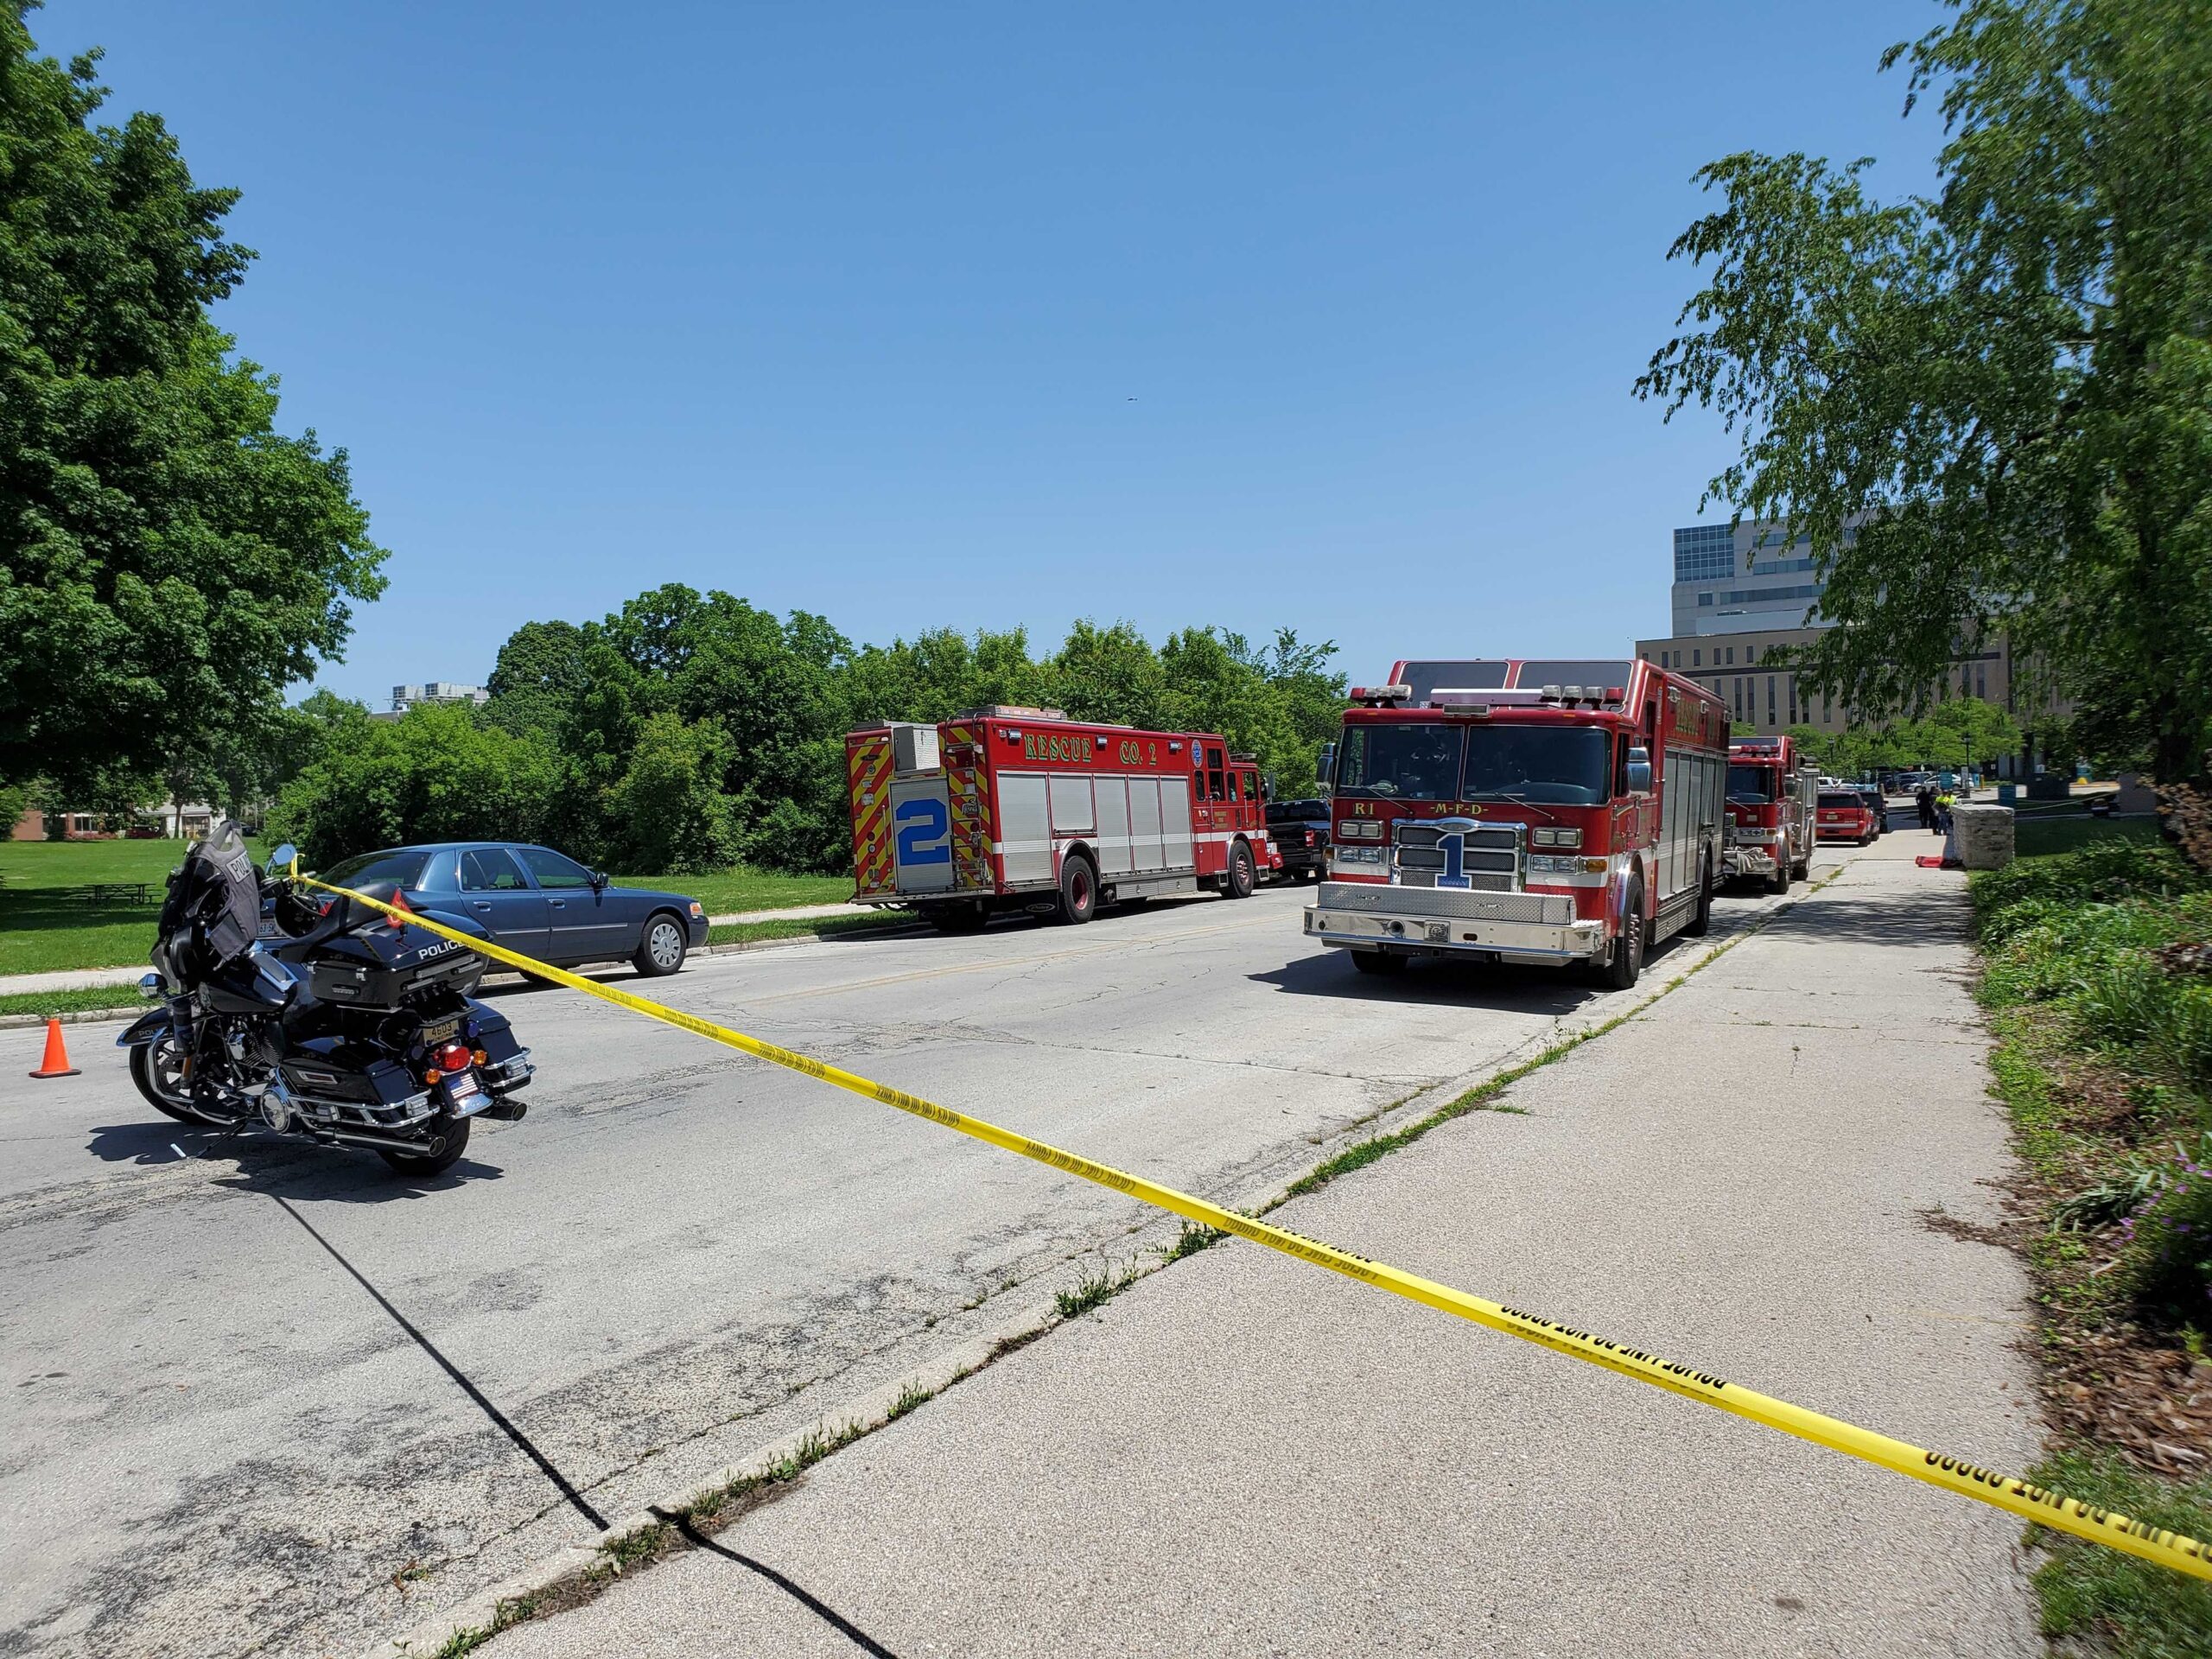 Crews blocked off an area near Aurora St. Luke's Medical Center on Tuesday as they searched for the bodies of an 10-year-old boy and two adults who drowned in high waters